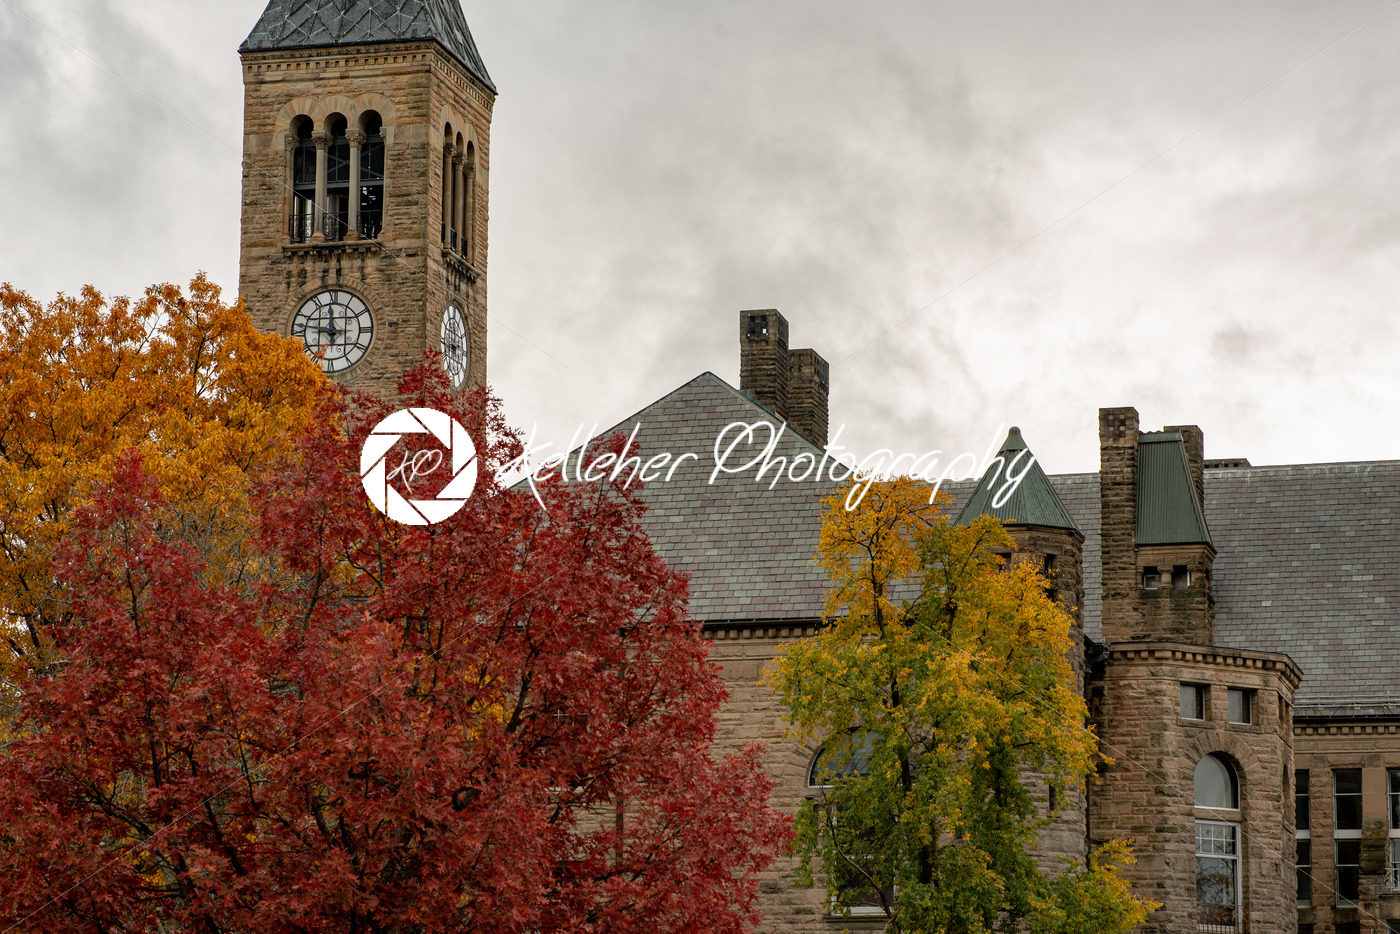 Buildings at Cornell University during peak fall time with autumn colors in Ithaca, New York - Kelleher Photography Store